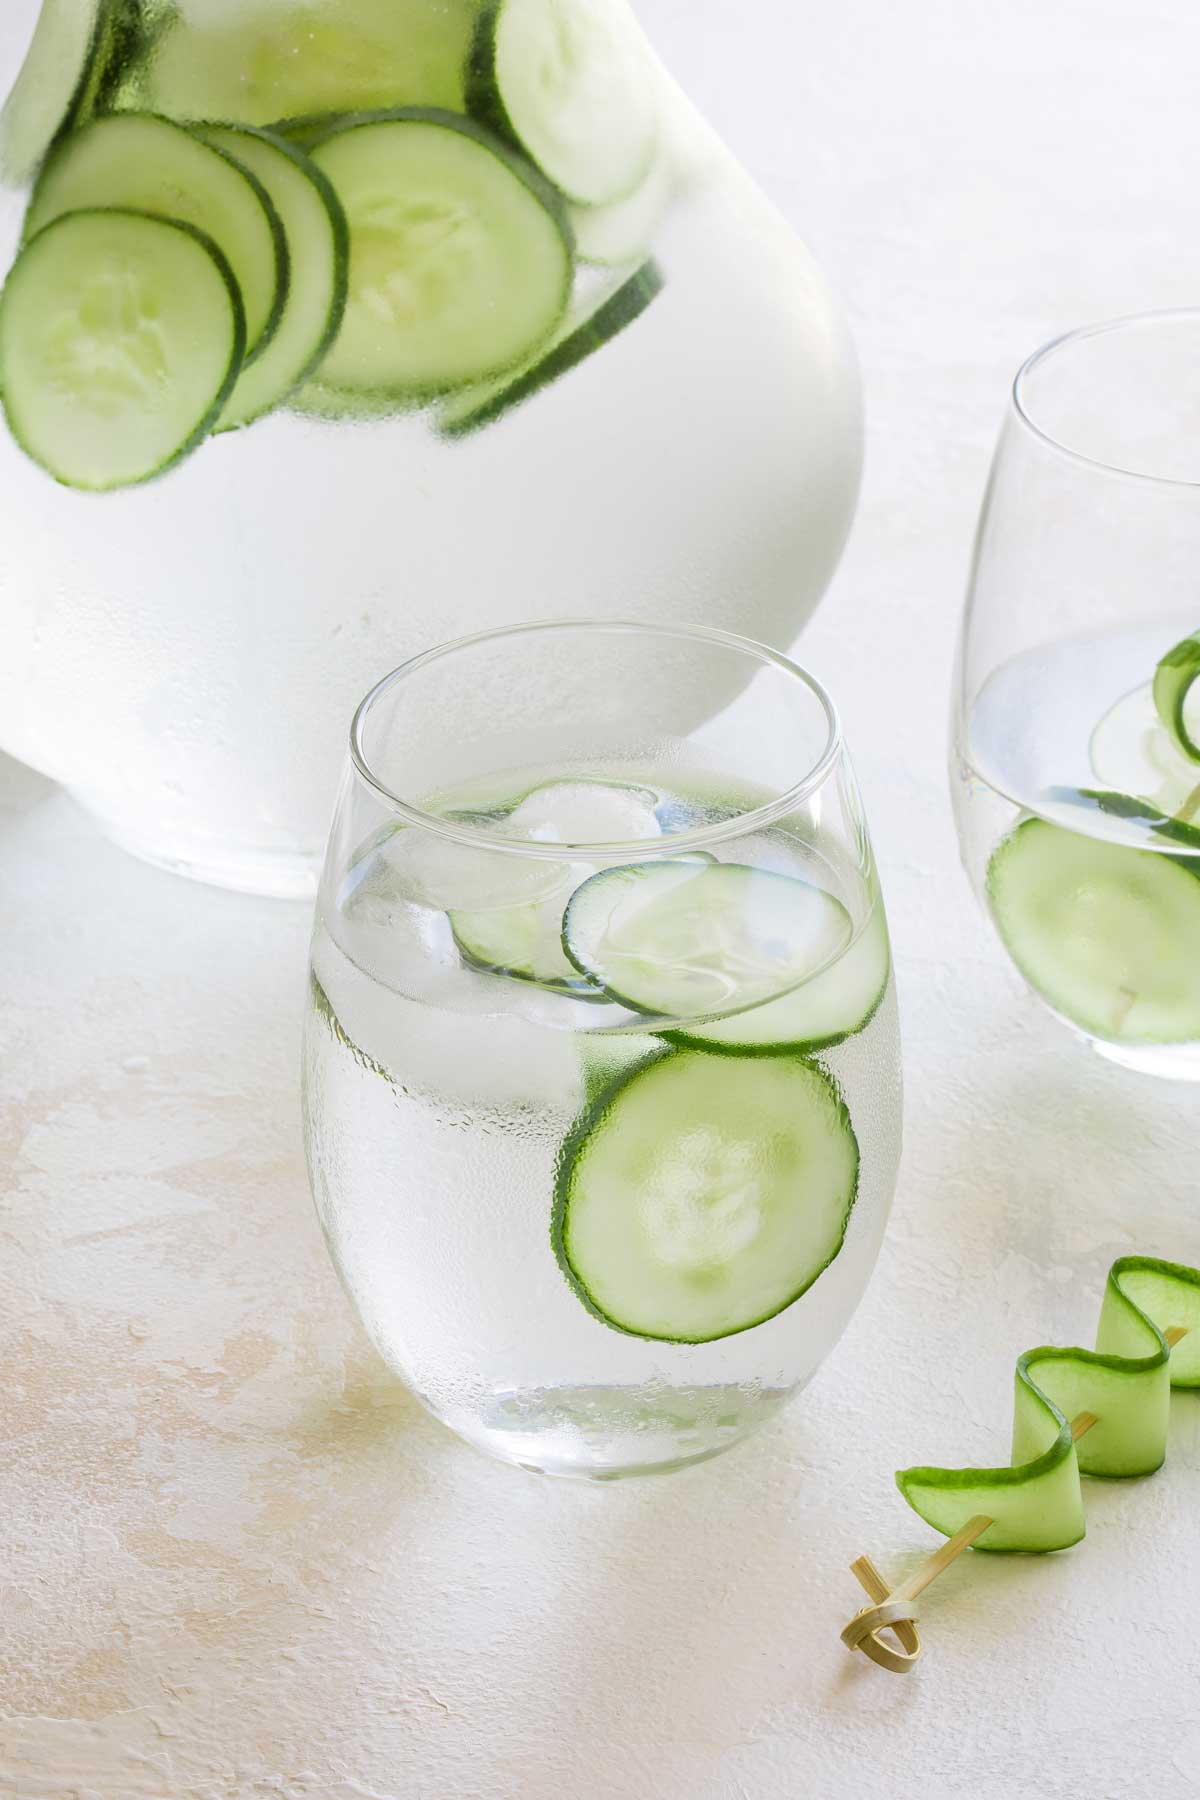 One glass of iced cucumber water in foreground, surrounded by a second glass, a filled pitcher, and a decorative garnish.